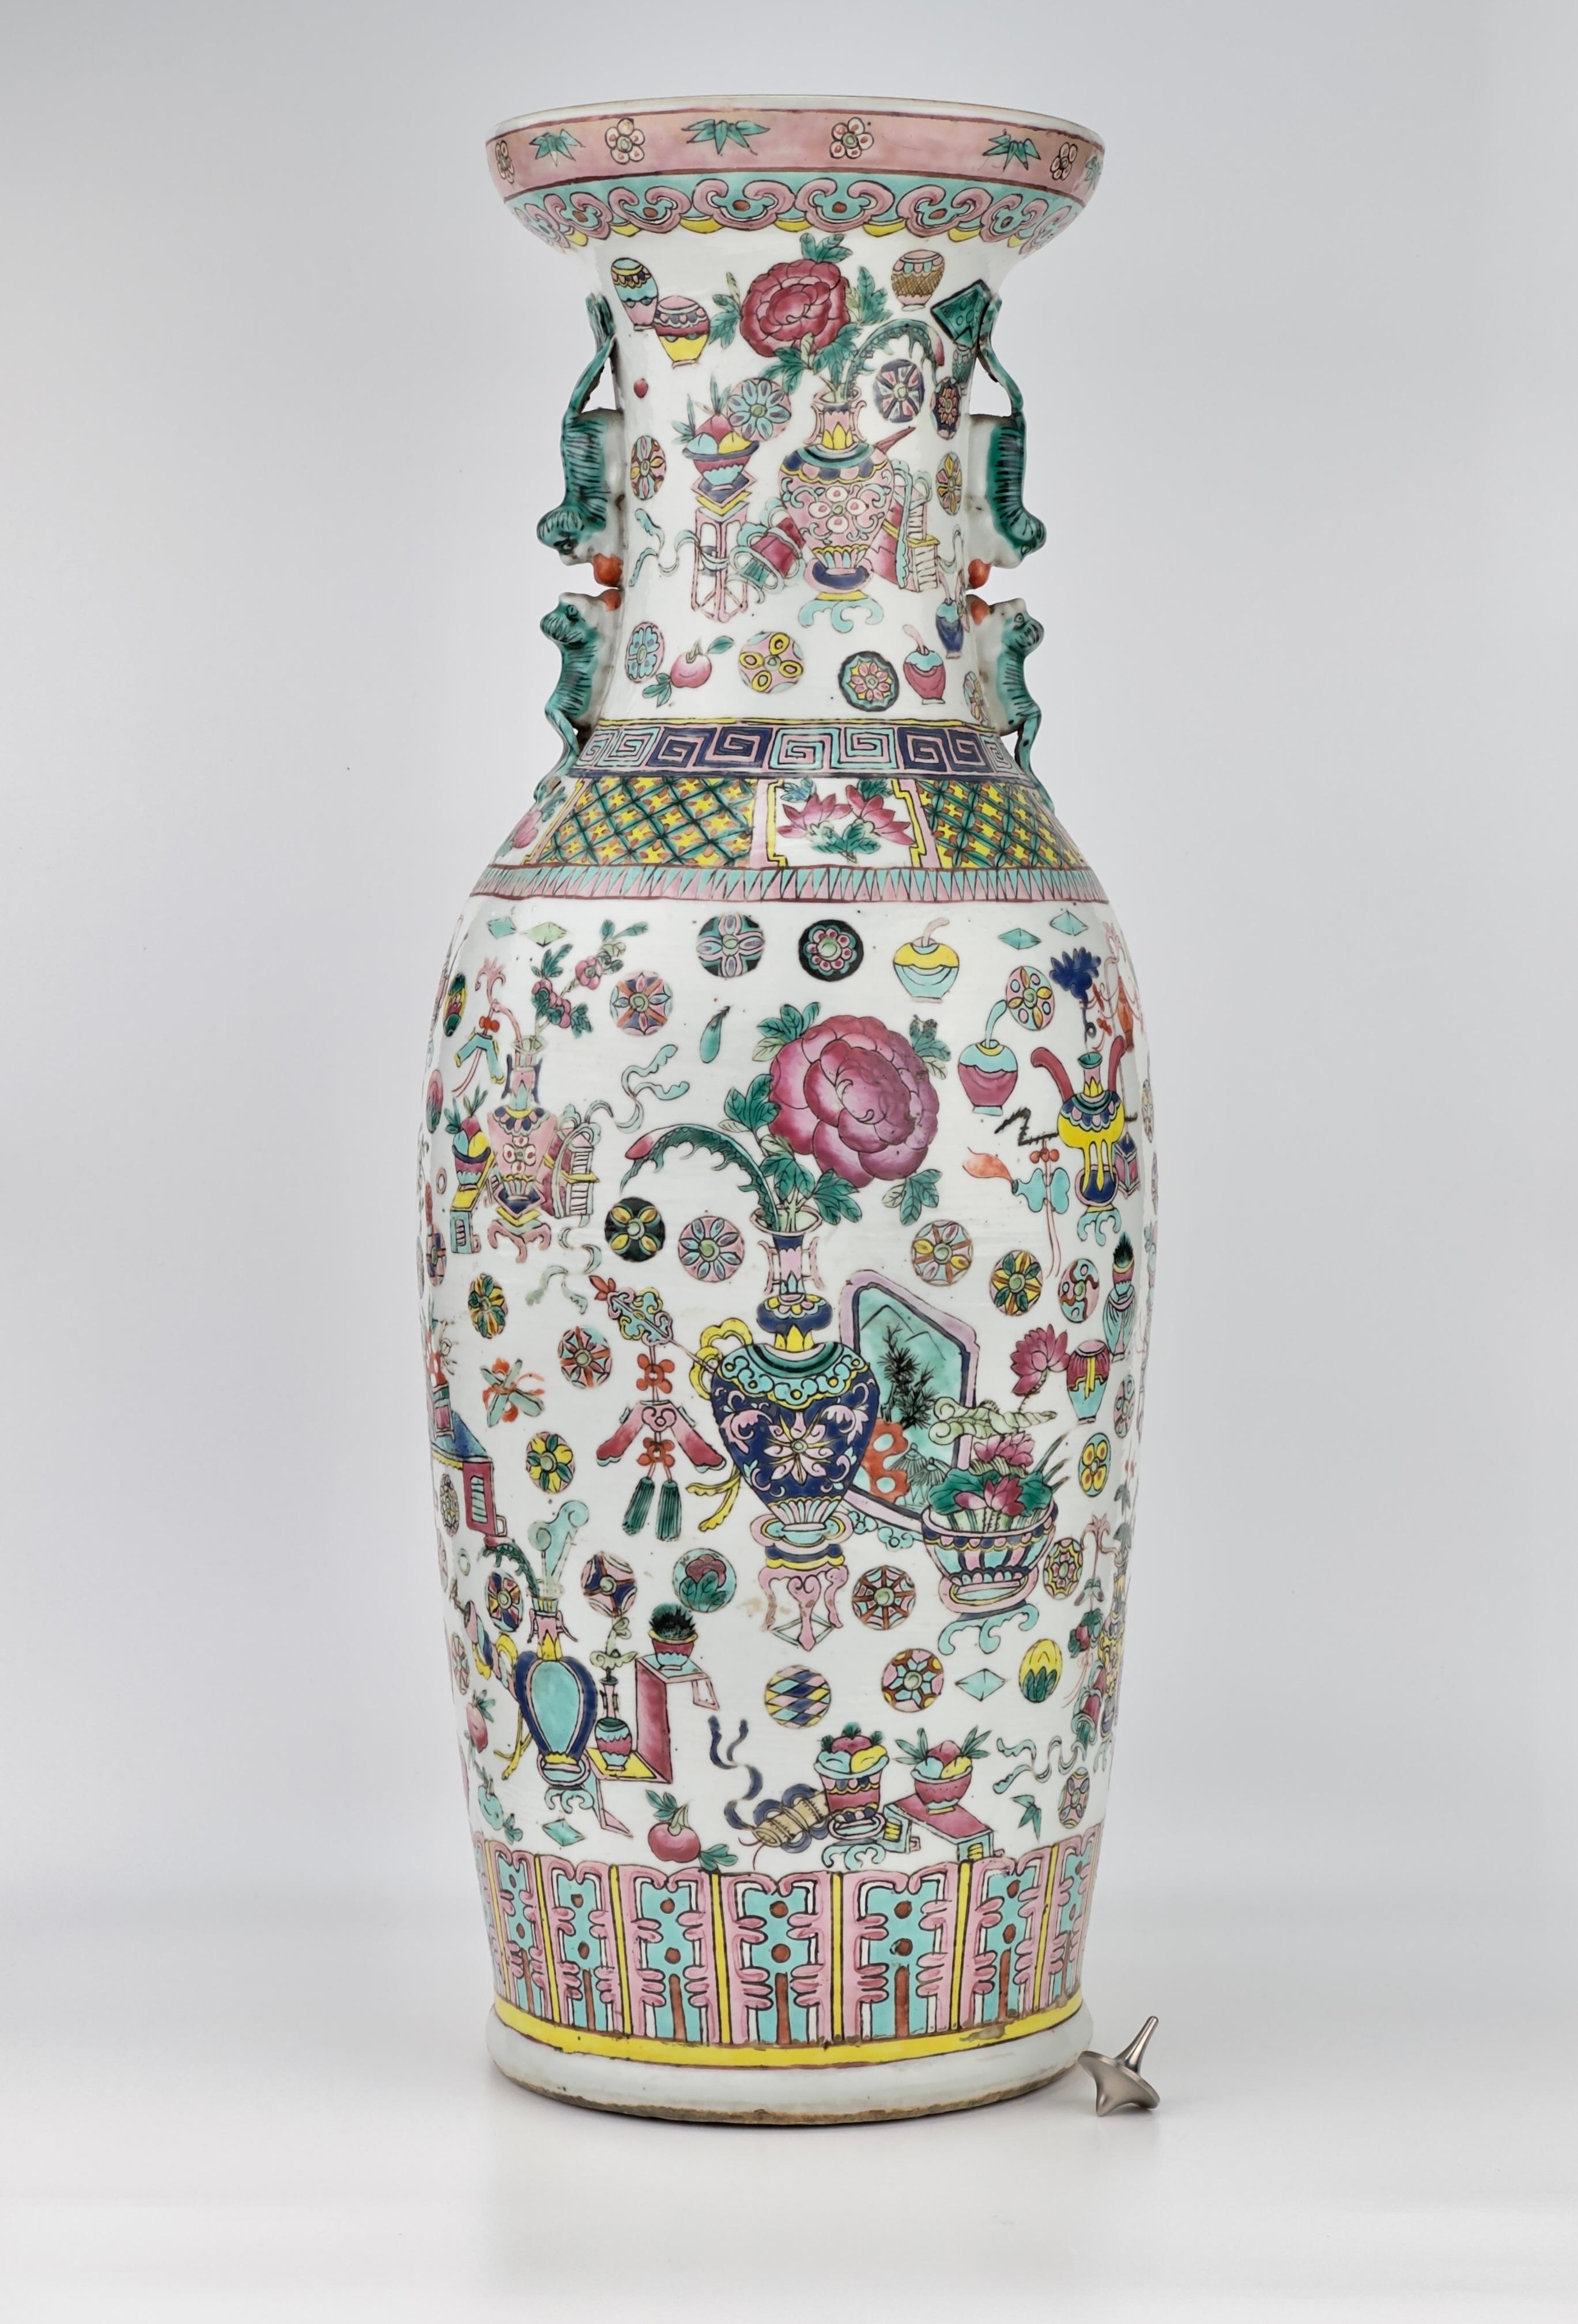 A Large Chinese Enameled Famille Rose Vase, Qing Period, 19th century For Sale 9